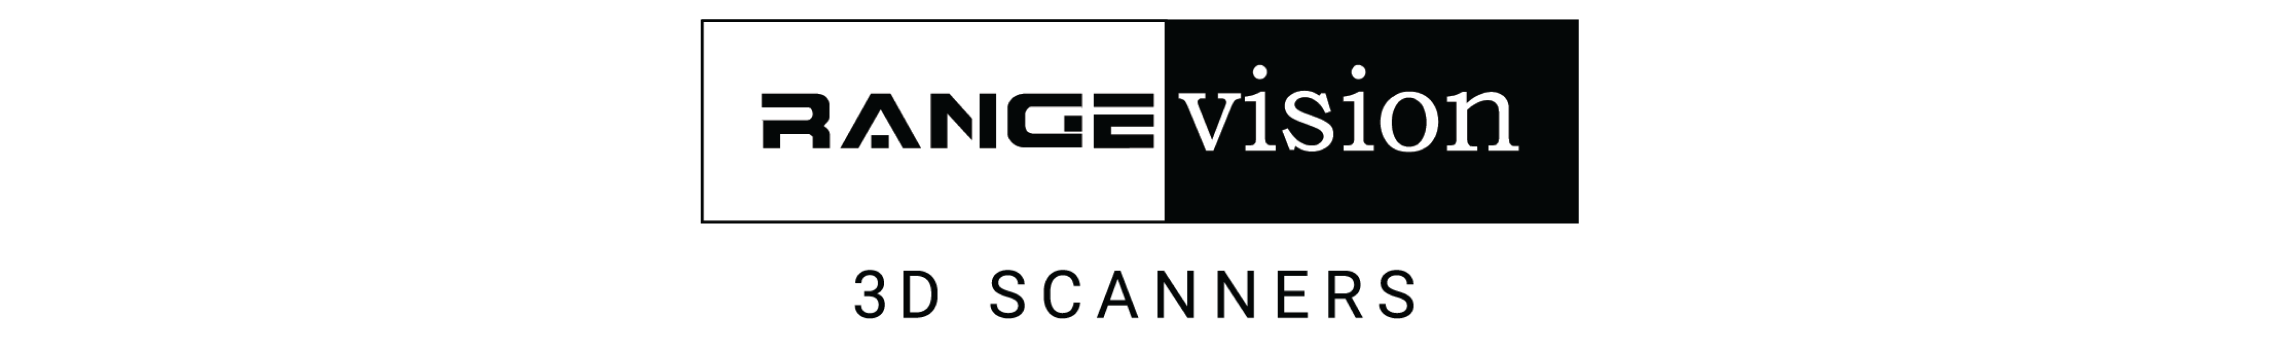 RangeVision 3D Scanners